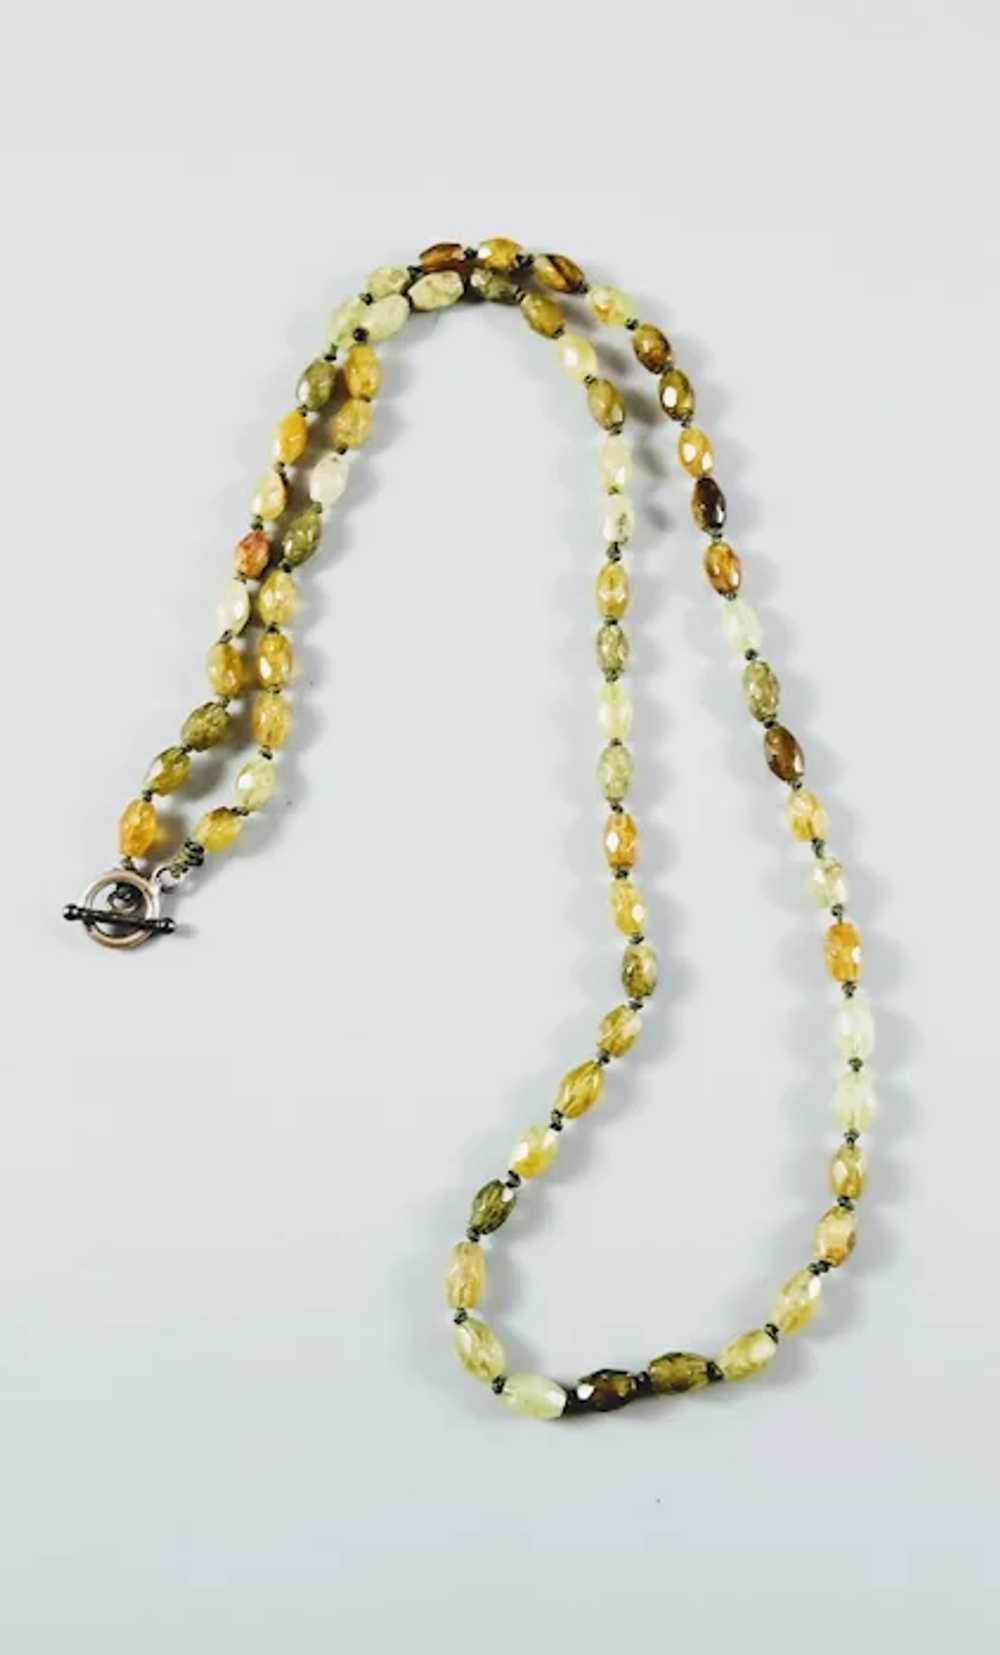 Faceted Peridot Beads Necklace - image 6